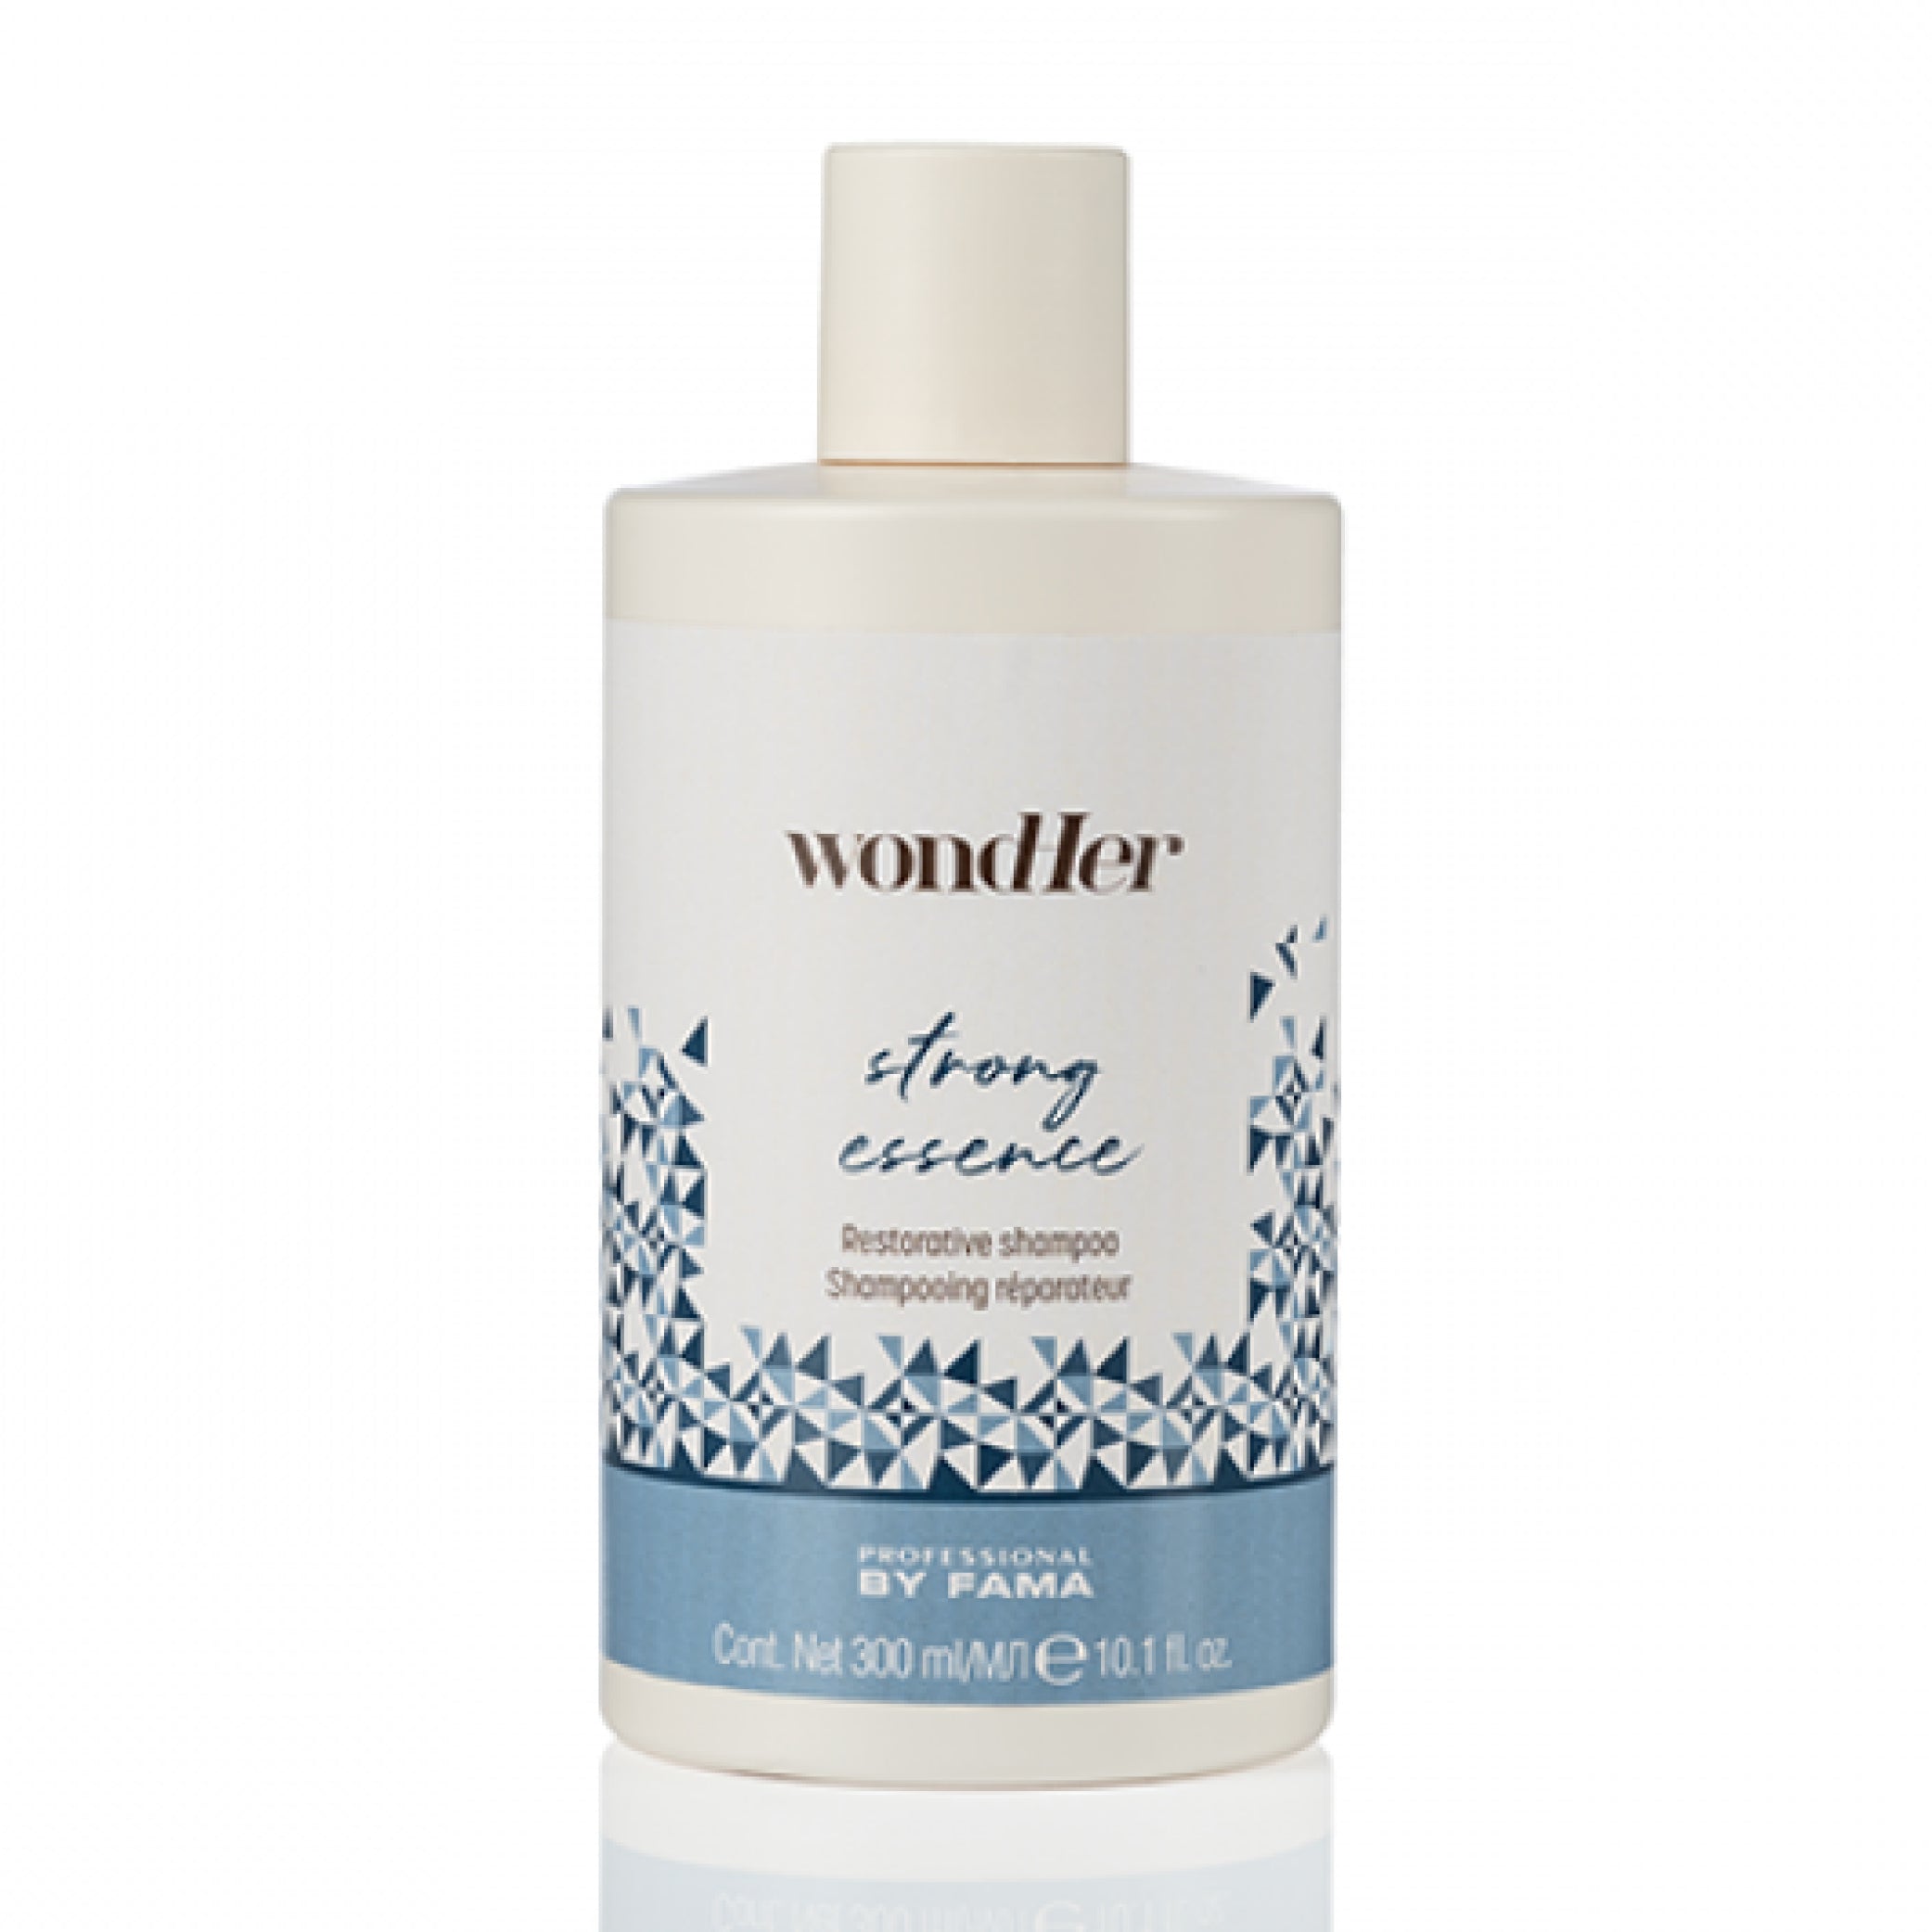 PBF WONDHER Strong Essence Shampoing reconstituant